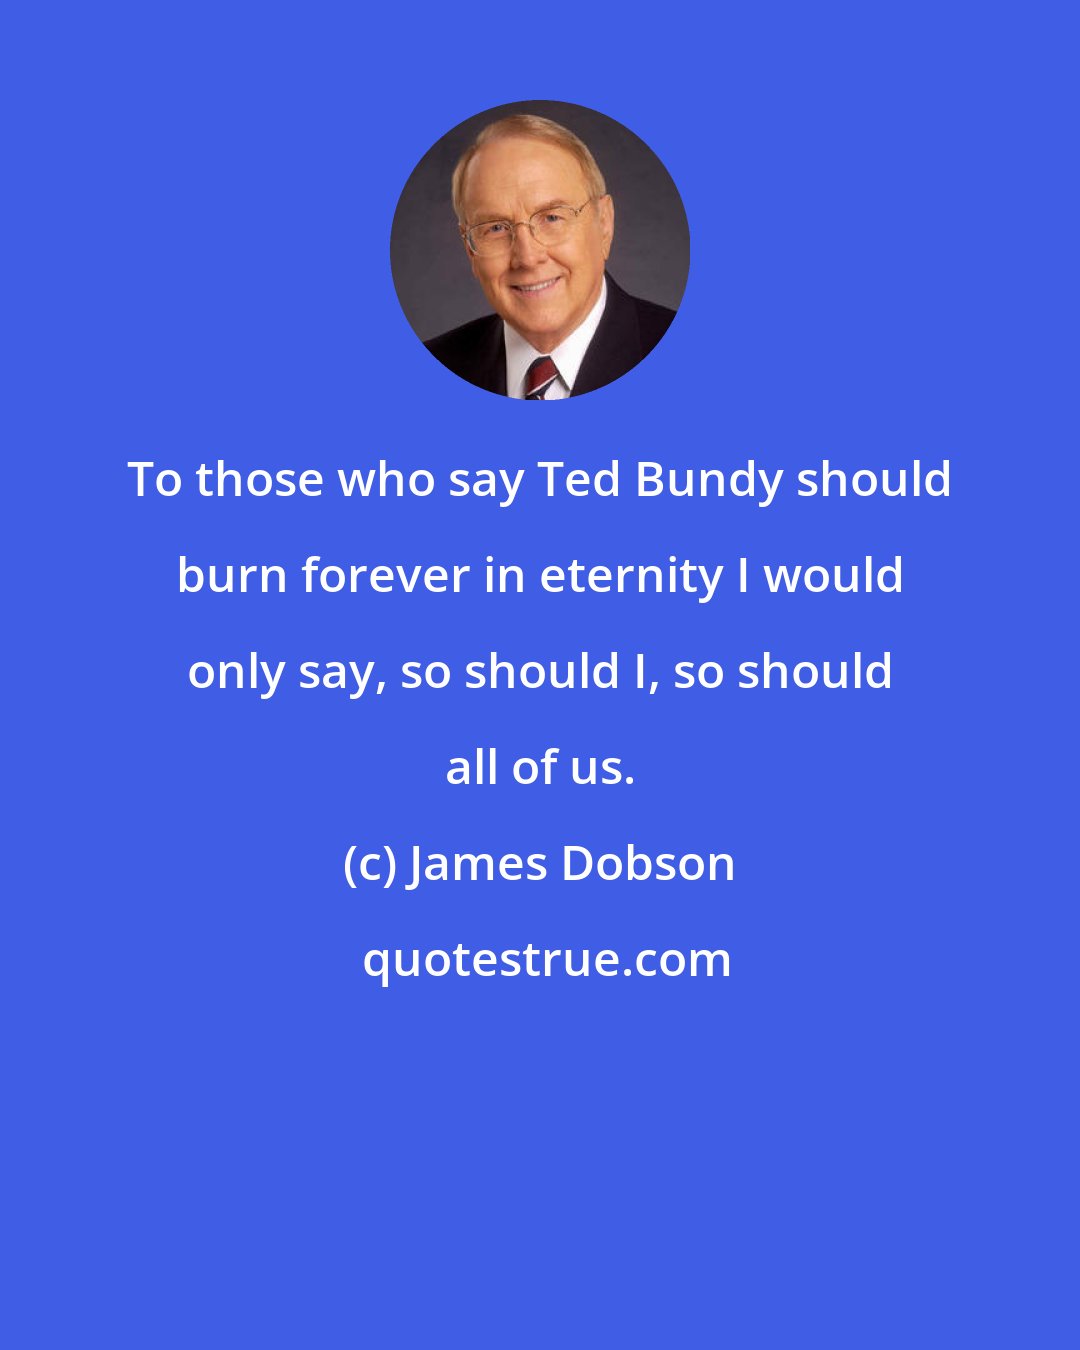 James Dobson: To those who say Ted Bundy should burn forever in eternity I would only say, so should I, so should all of us.